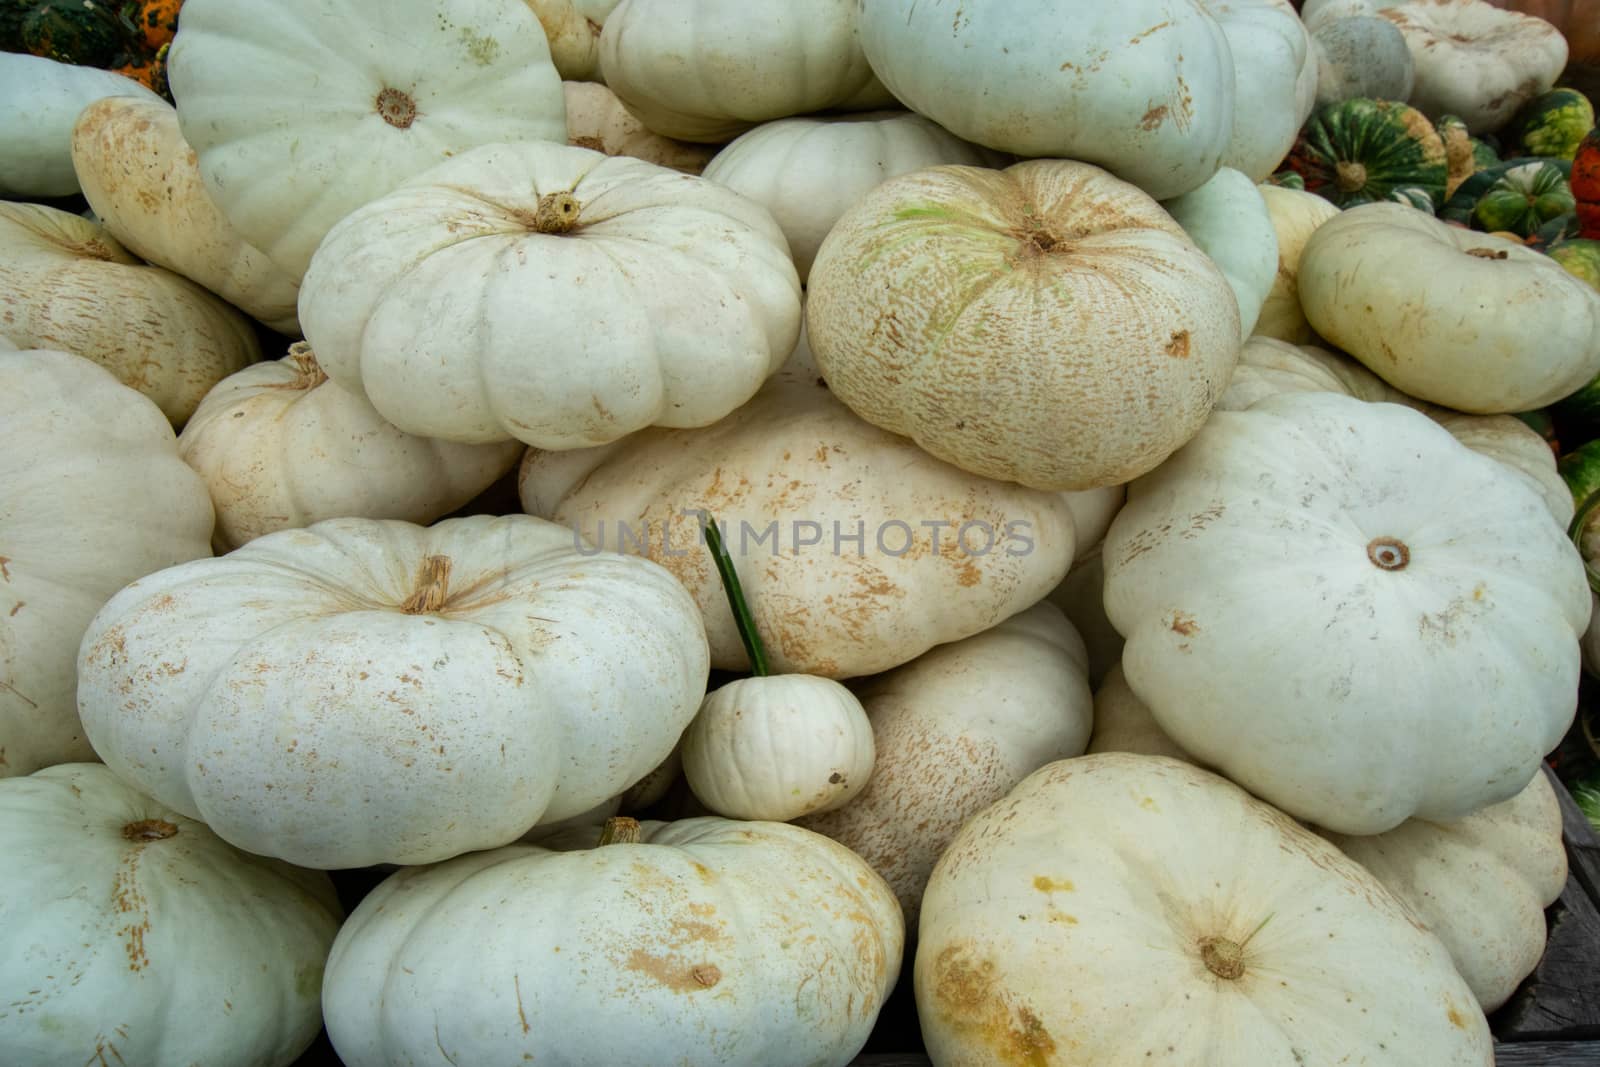 Large White Pumpkins in a Pile Filling the Frame by bju12290